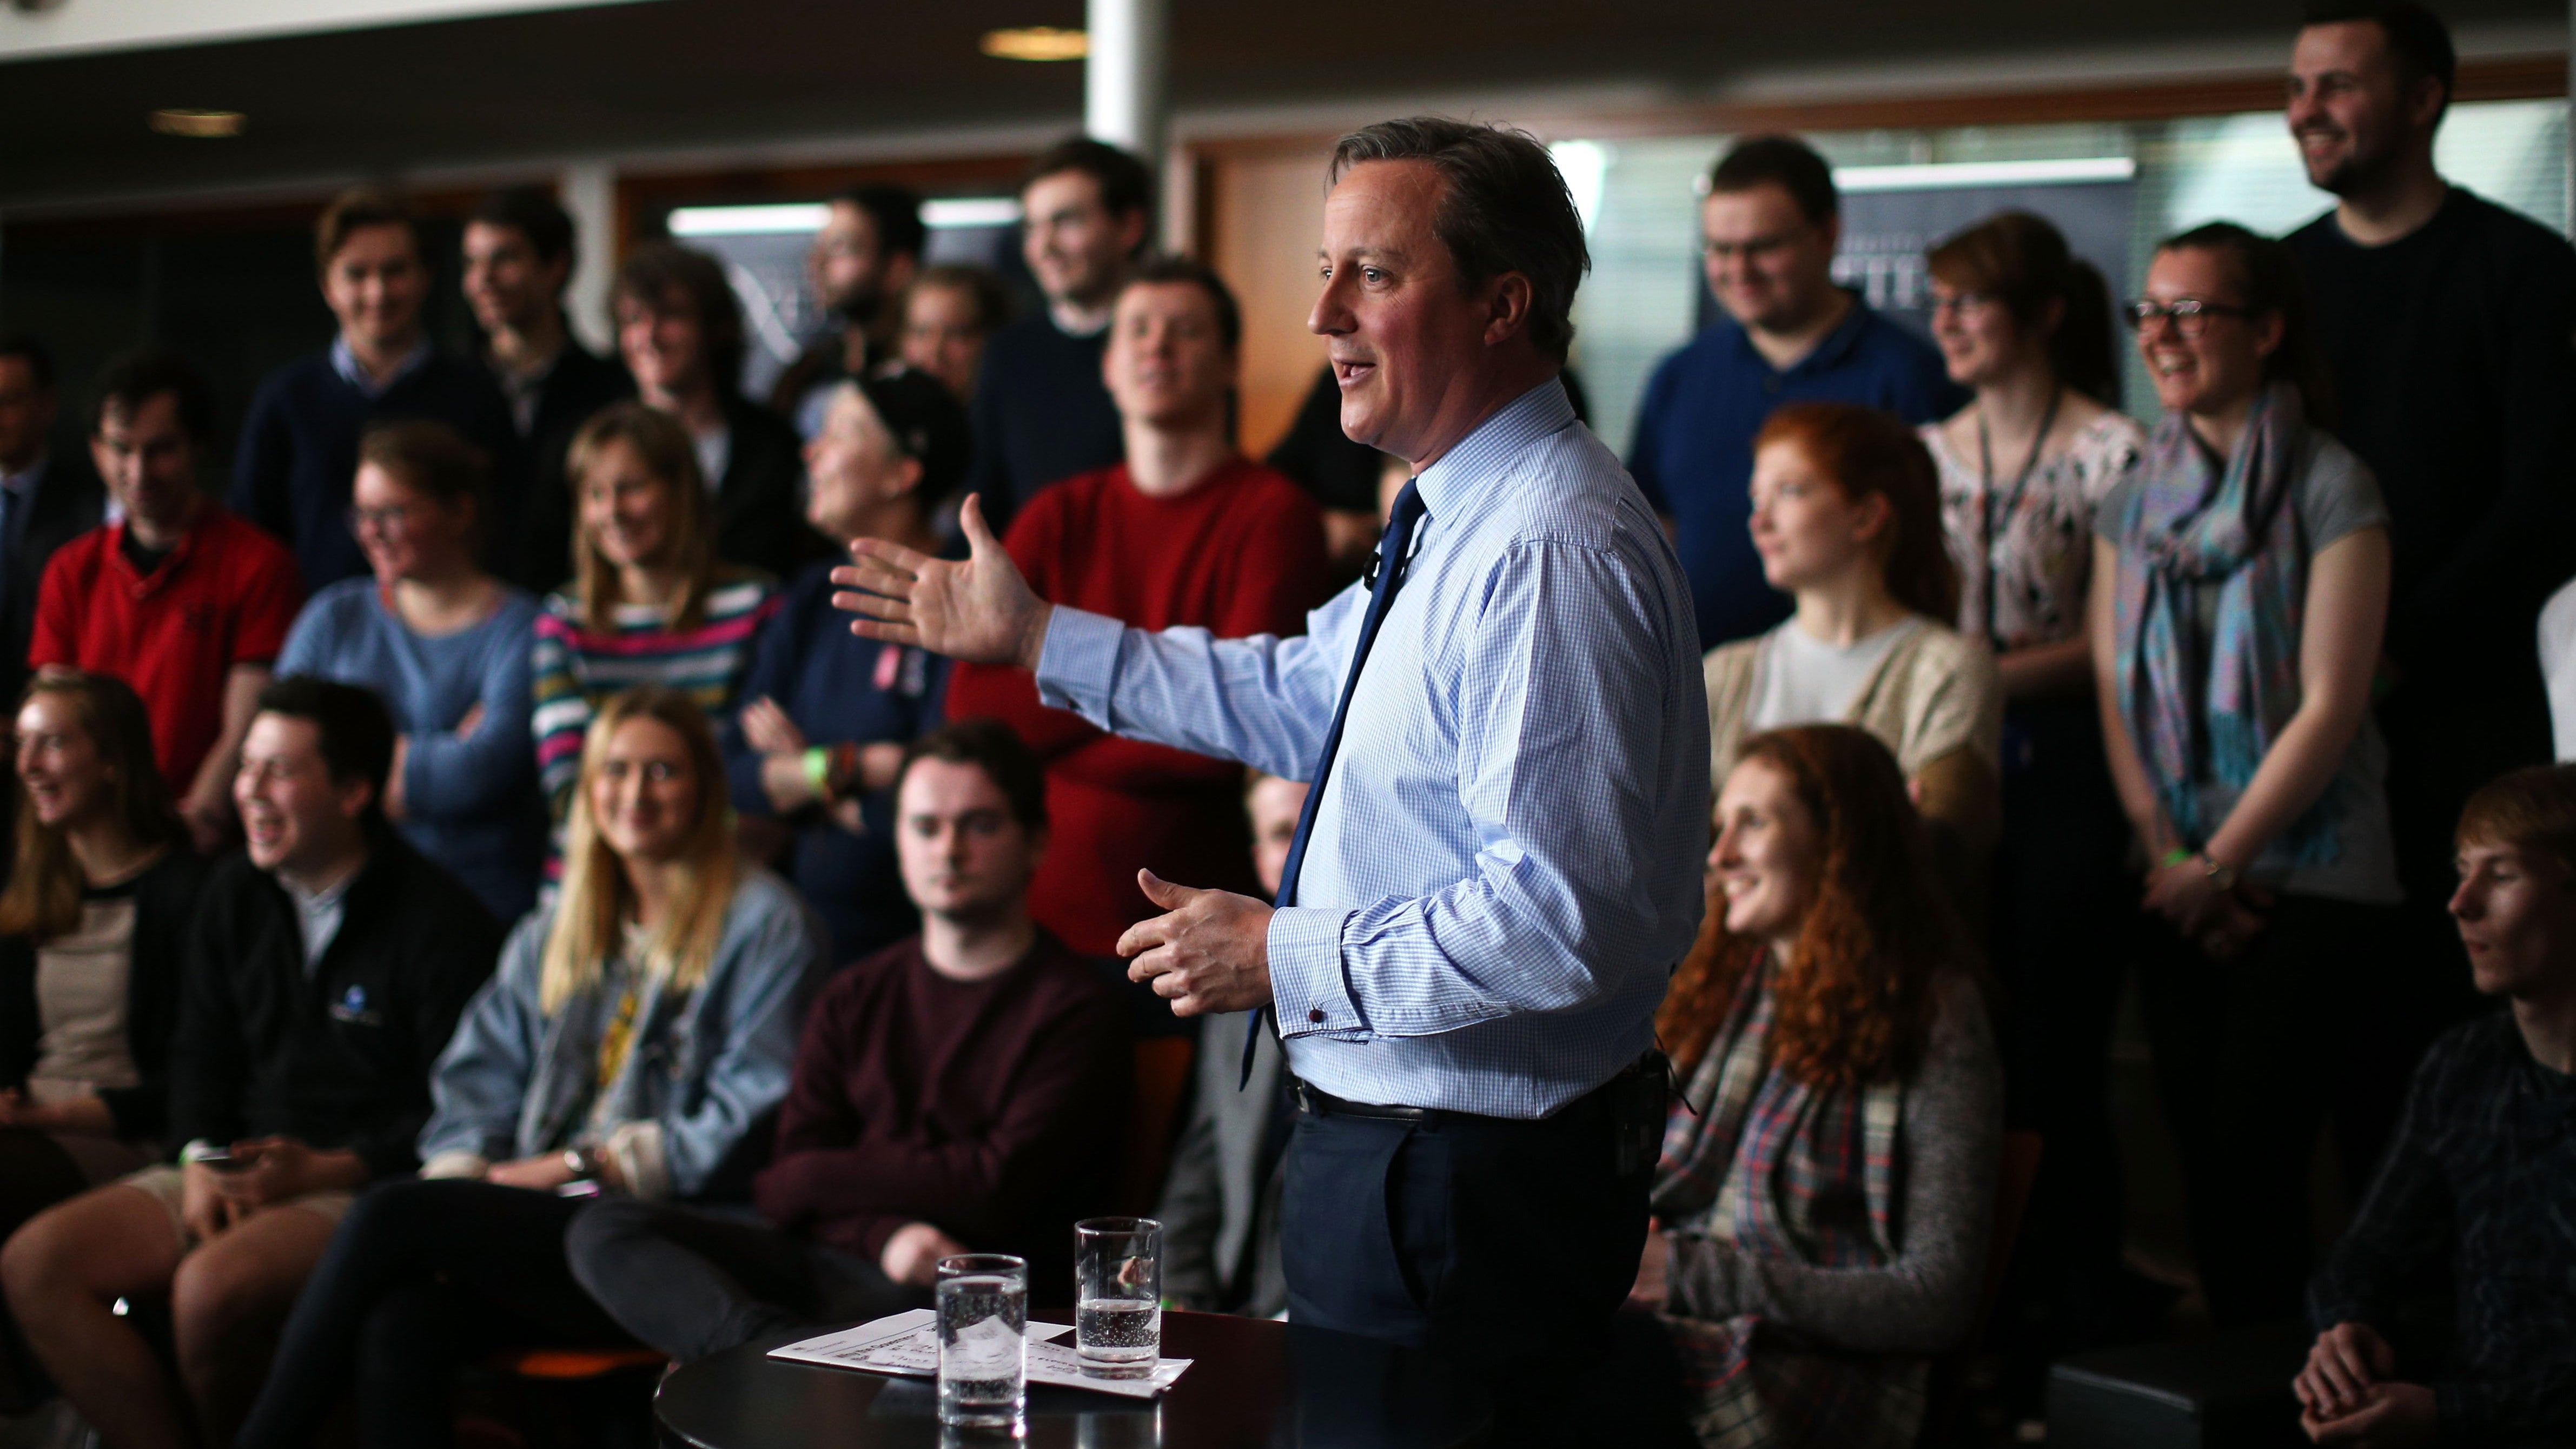 David Cameron, pictured, addresses students at Exeter University in April about the upcoming referendum